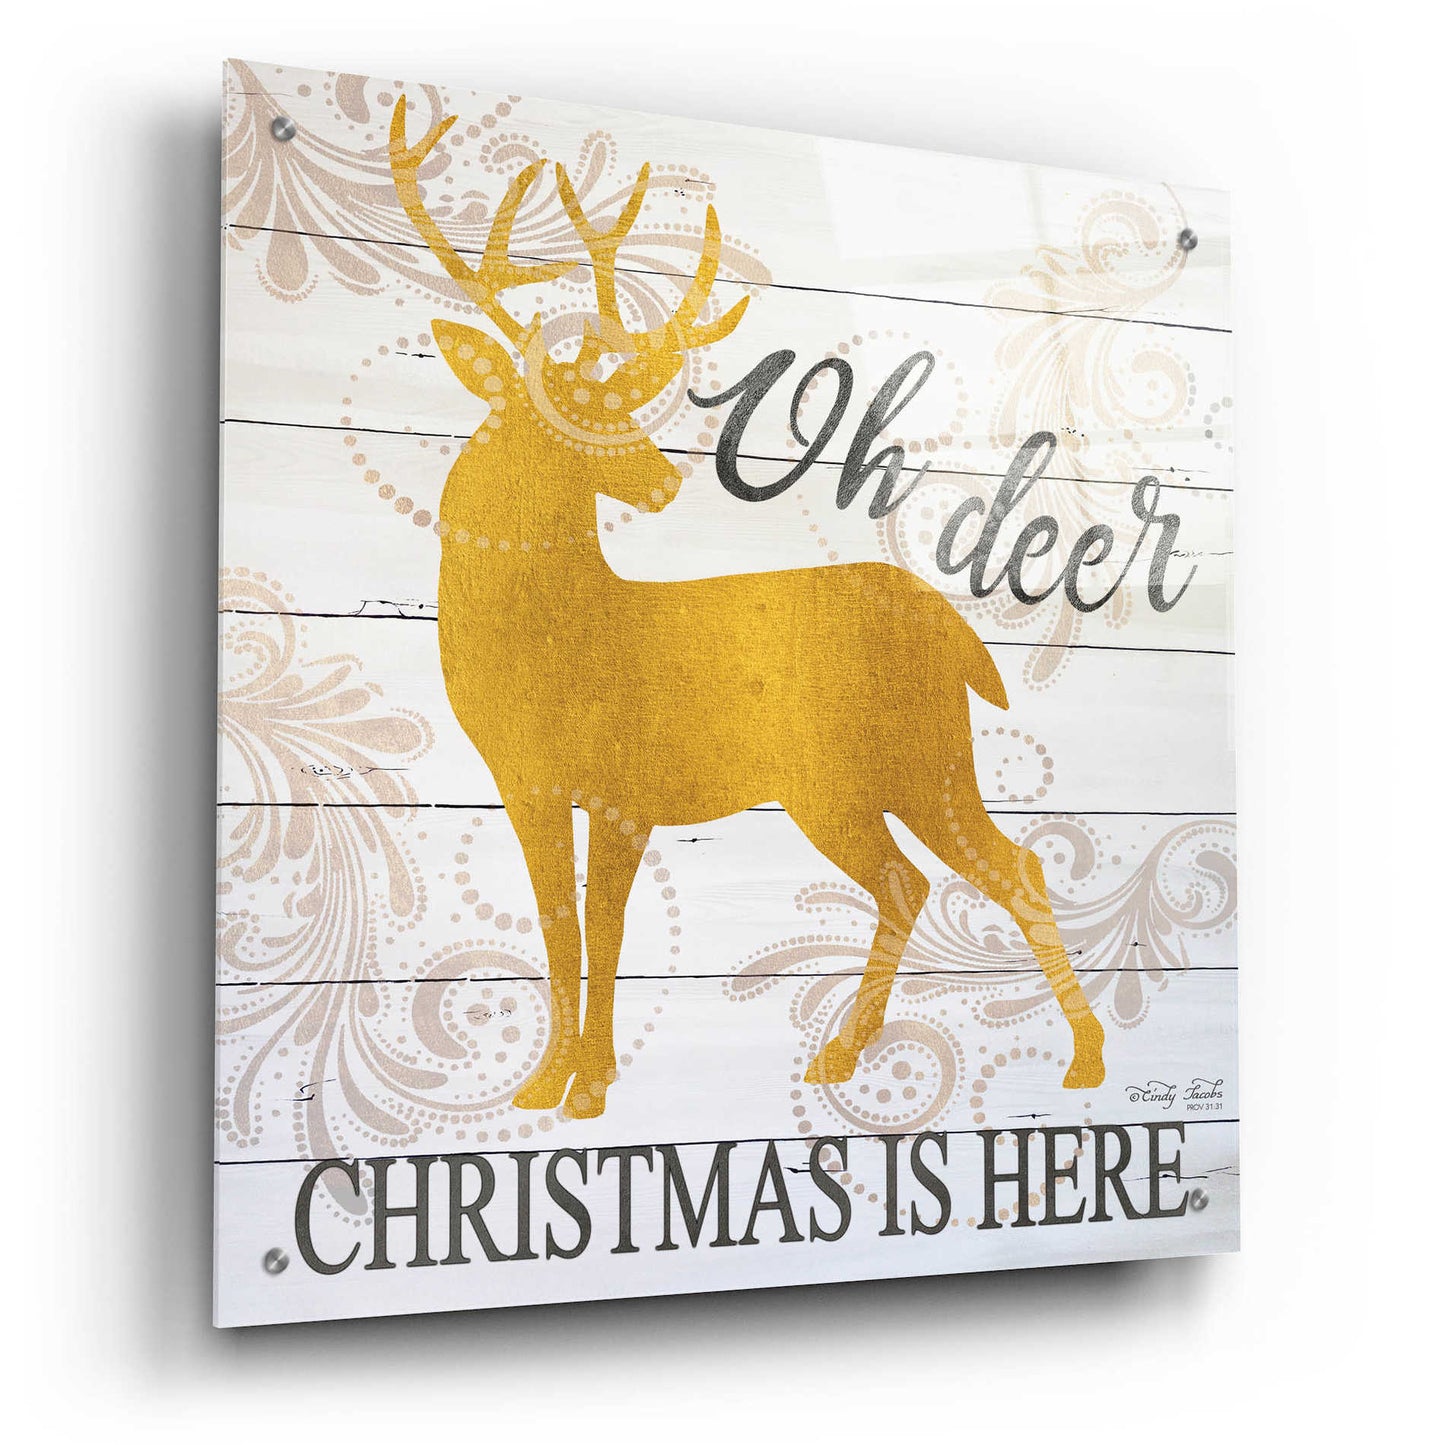 Epic Art 'Oh Deer Christmas is Here' by Cindy Jacobs, Acrylic Glass Wall Art,24x24